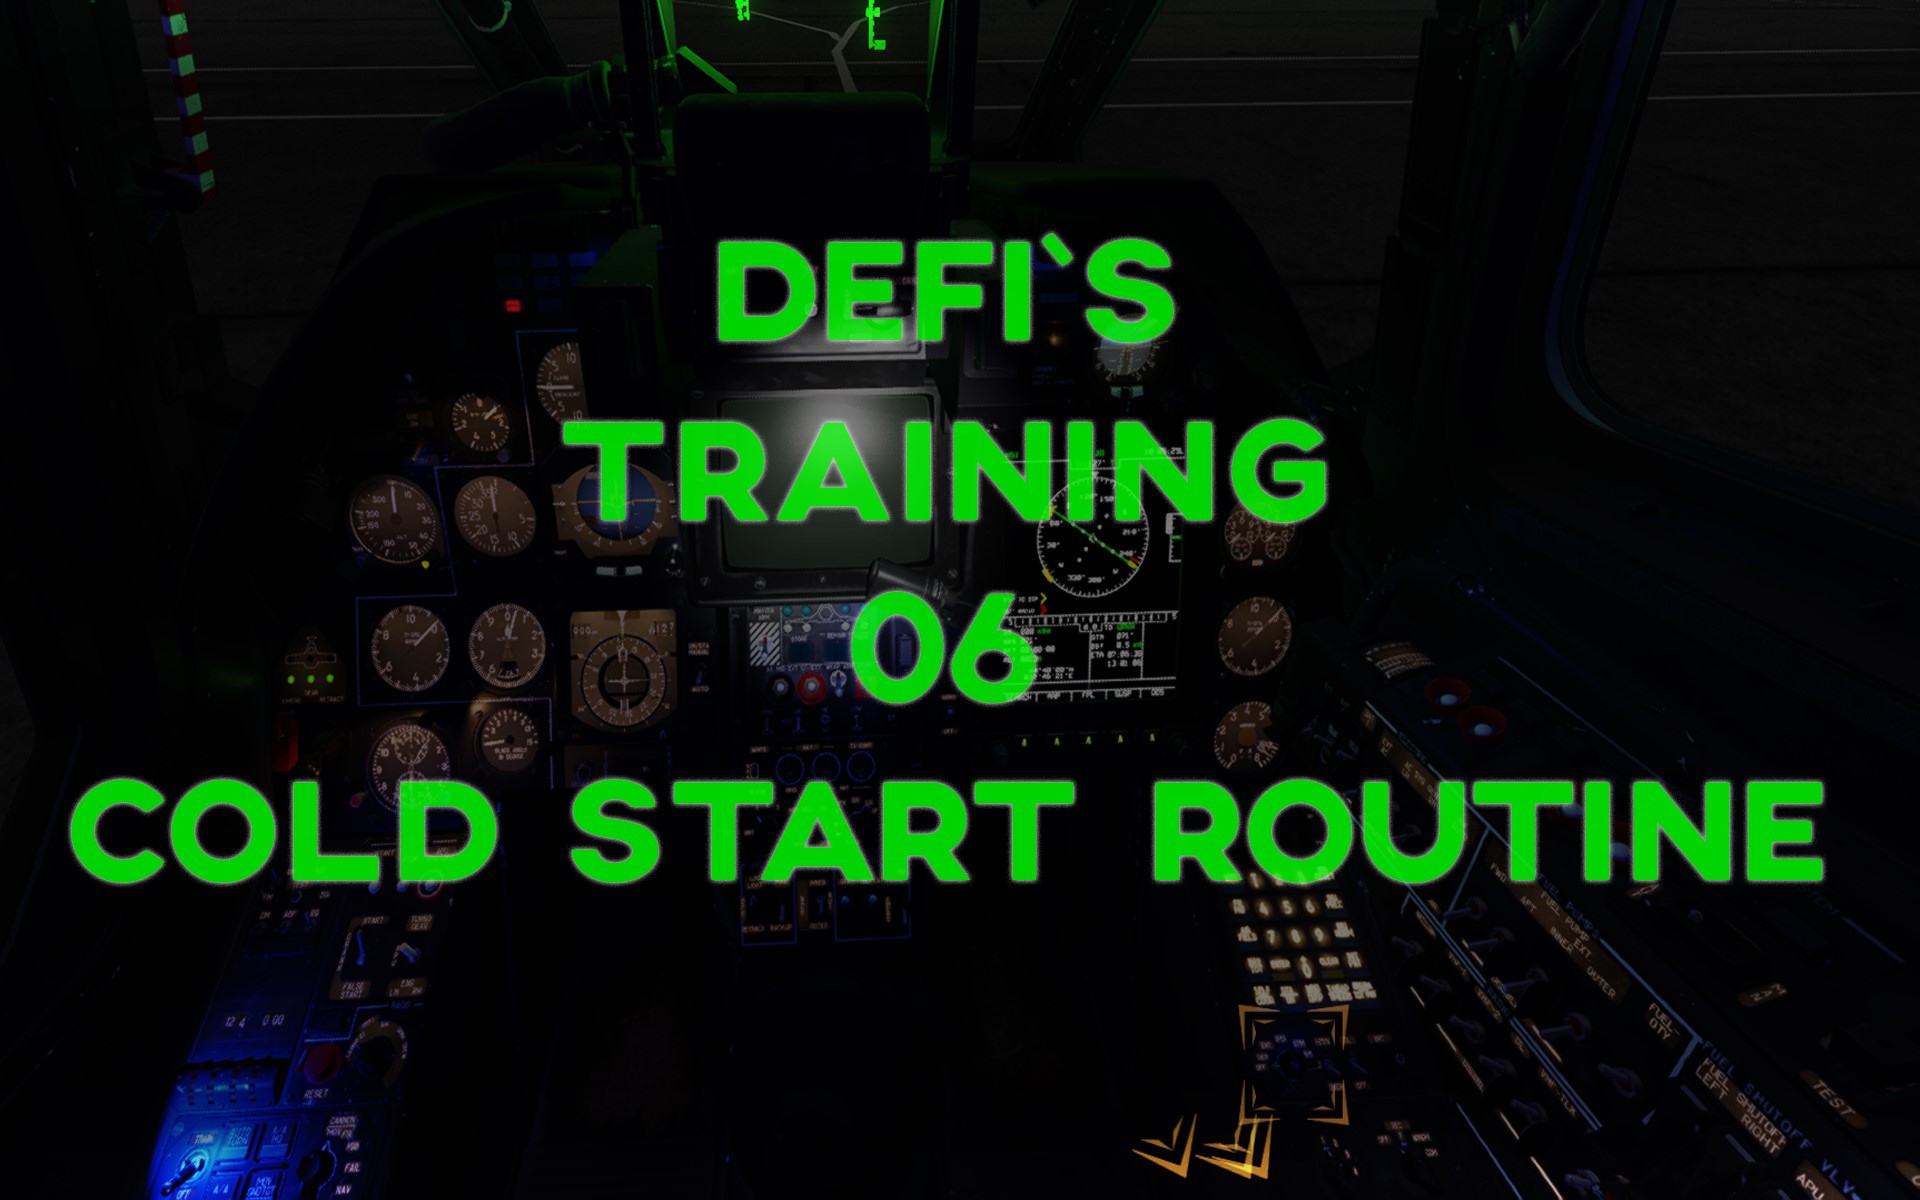 DEFIs Training Mission [06] - Cold Start Routine (Day/Night) in the KA50 Black Shark 3